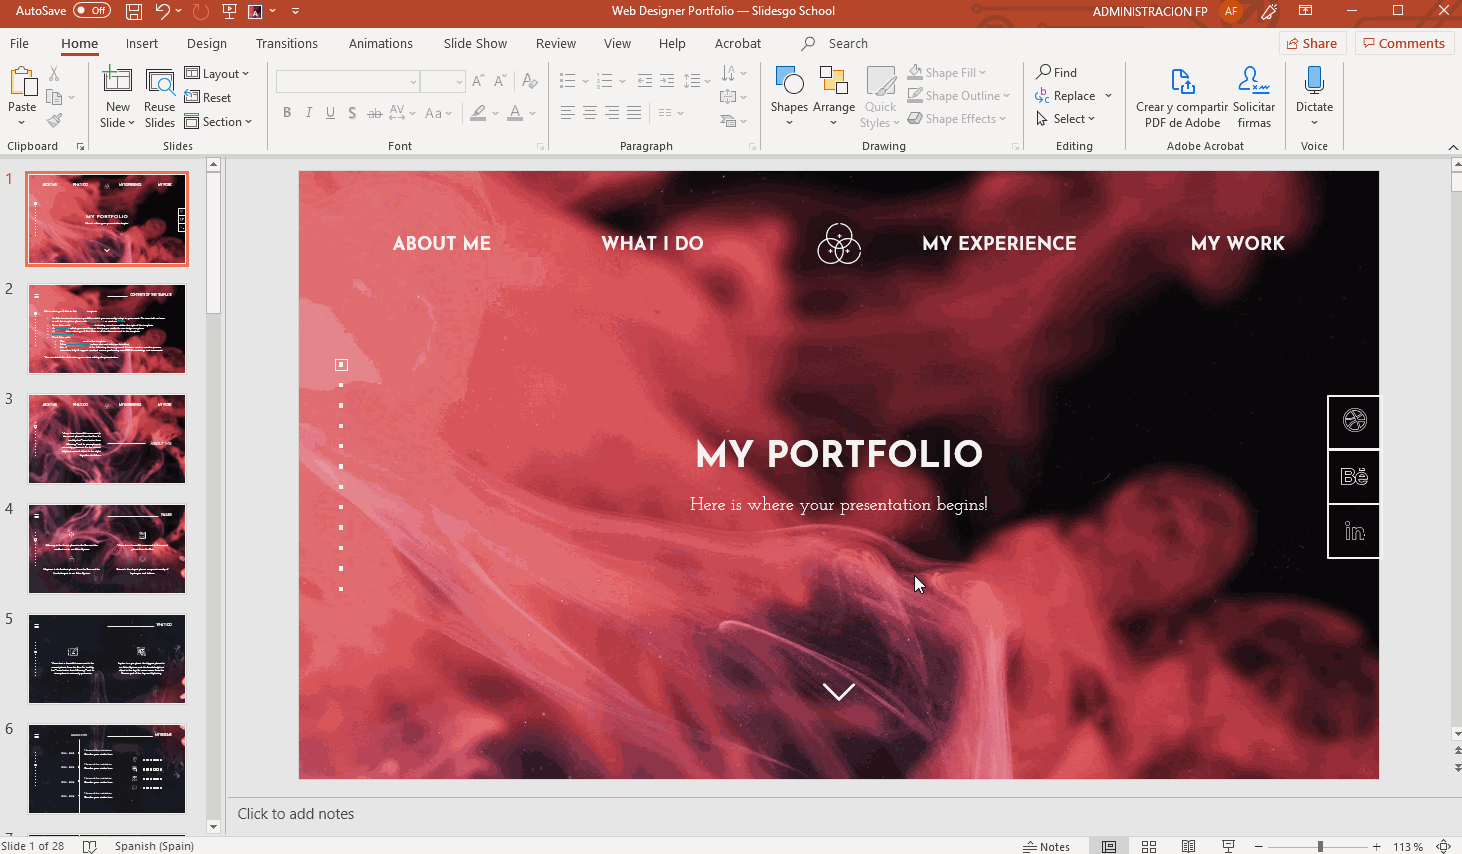 How to Insert, Crop or Mask Images in PowerPoint -7